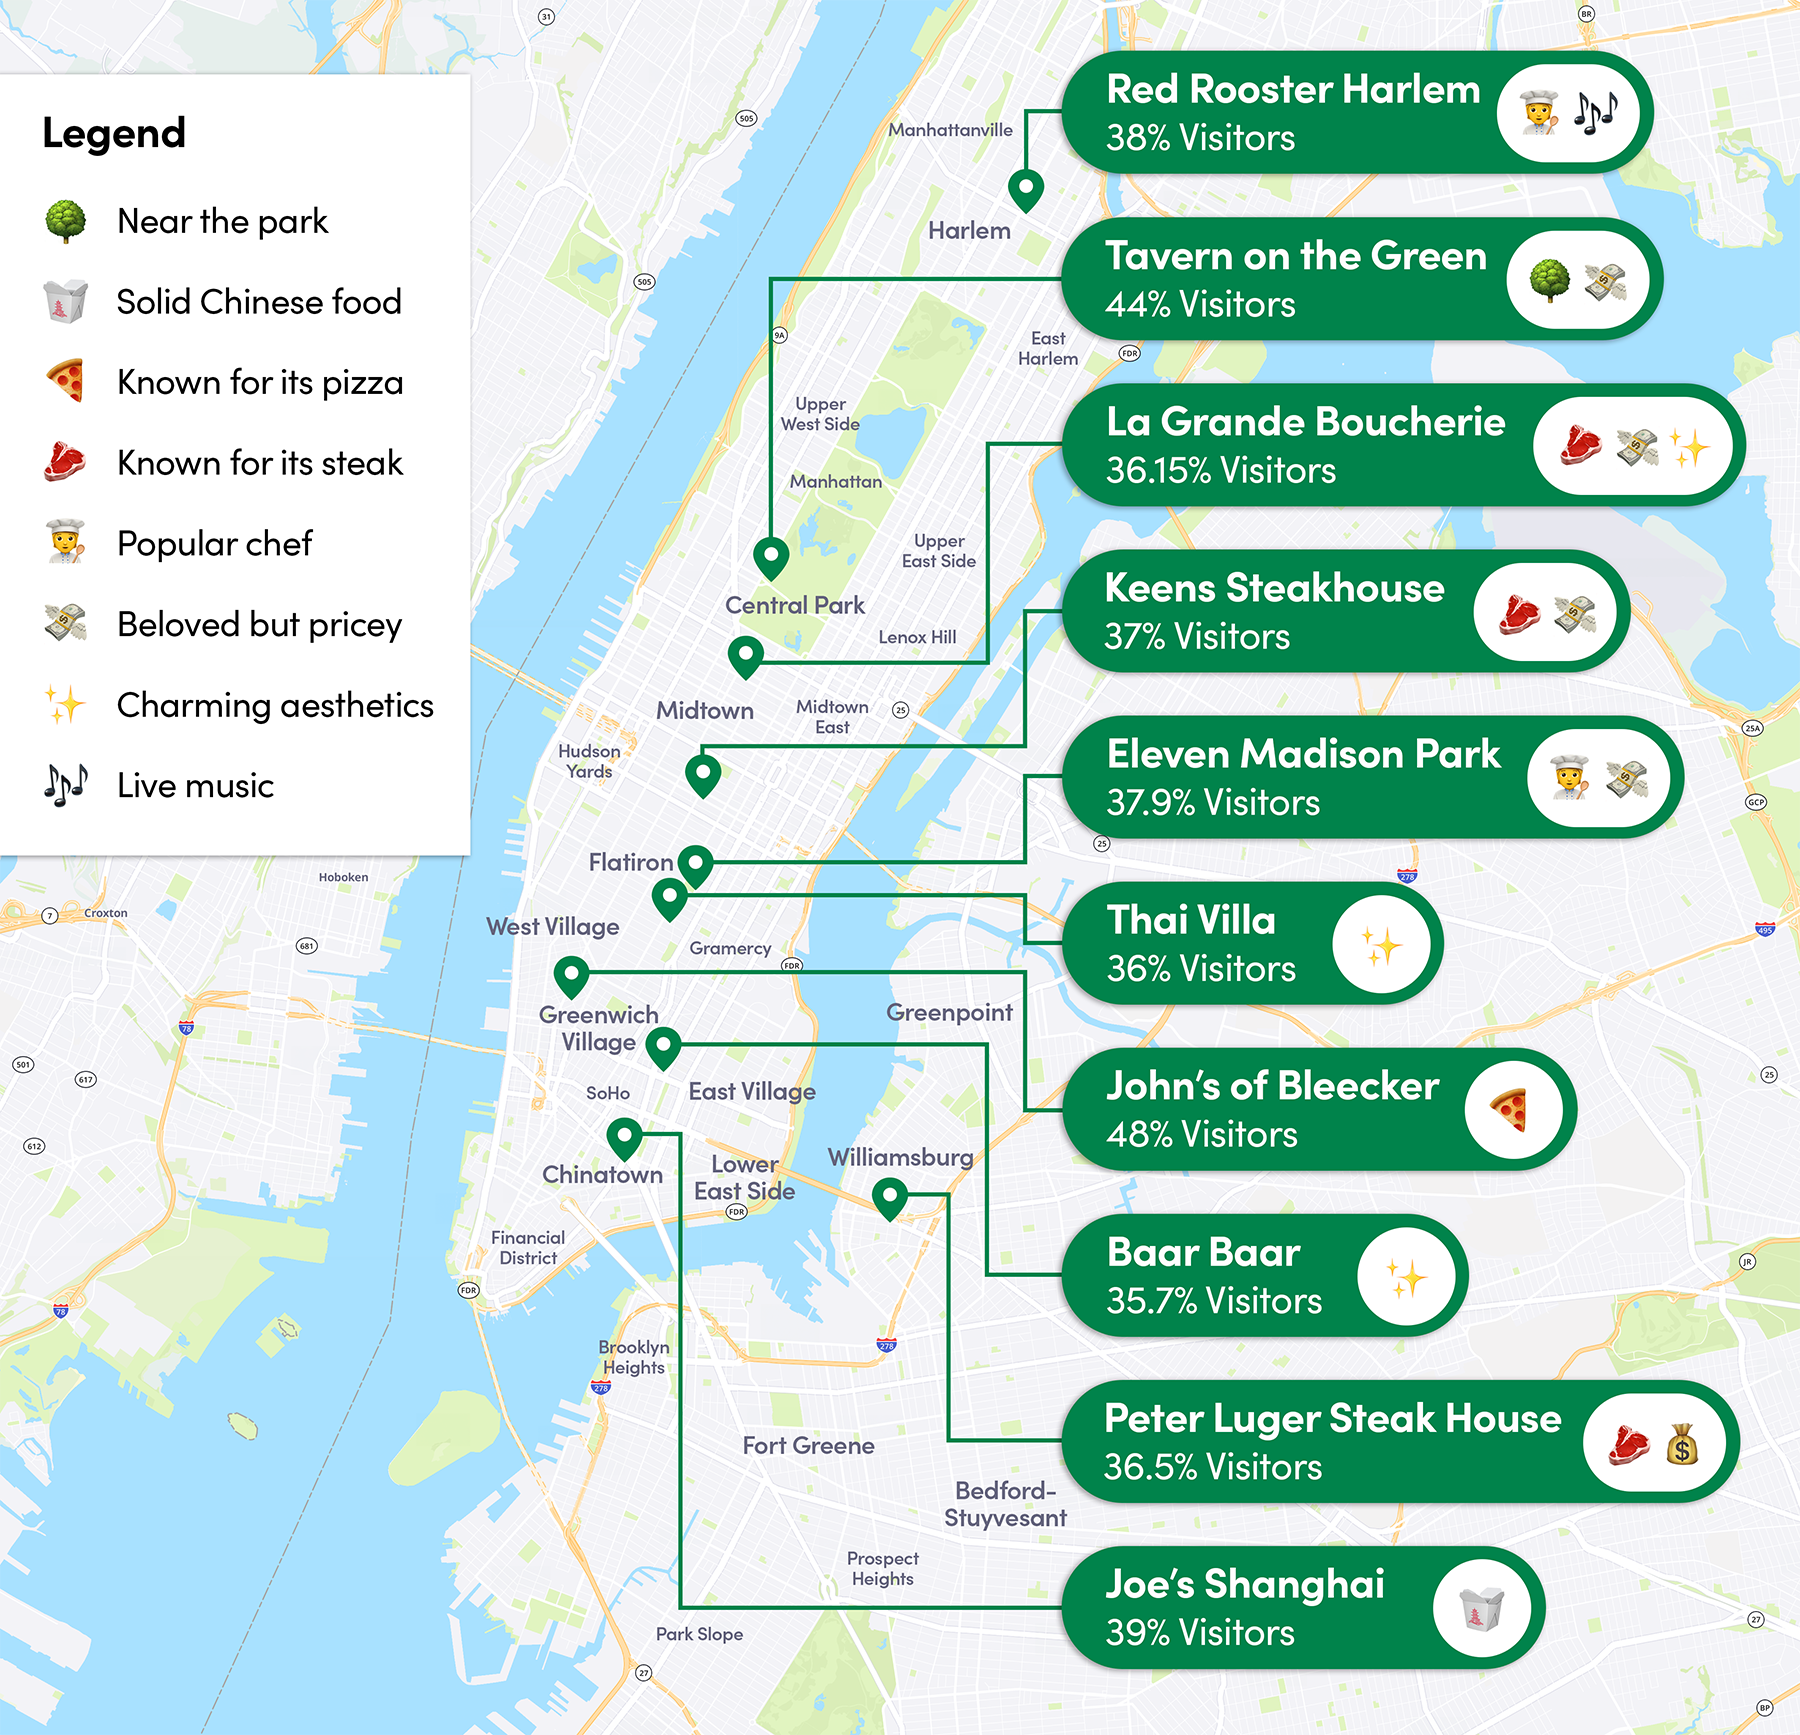 map of NYC with highlighted locations where visitors go